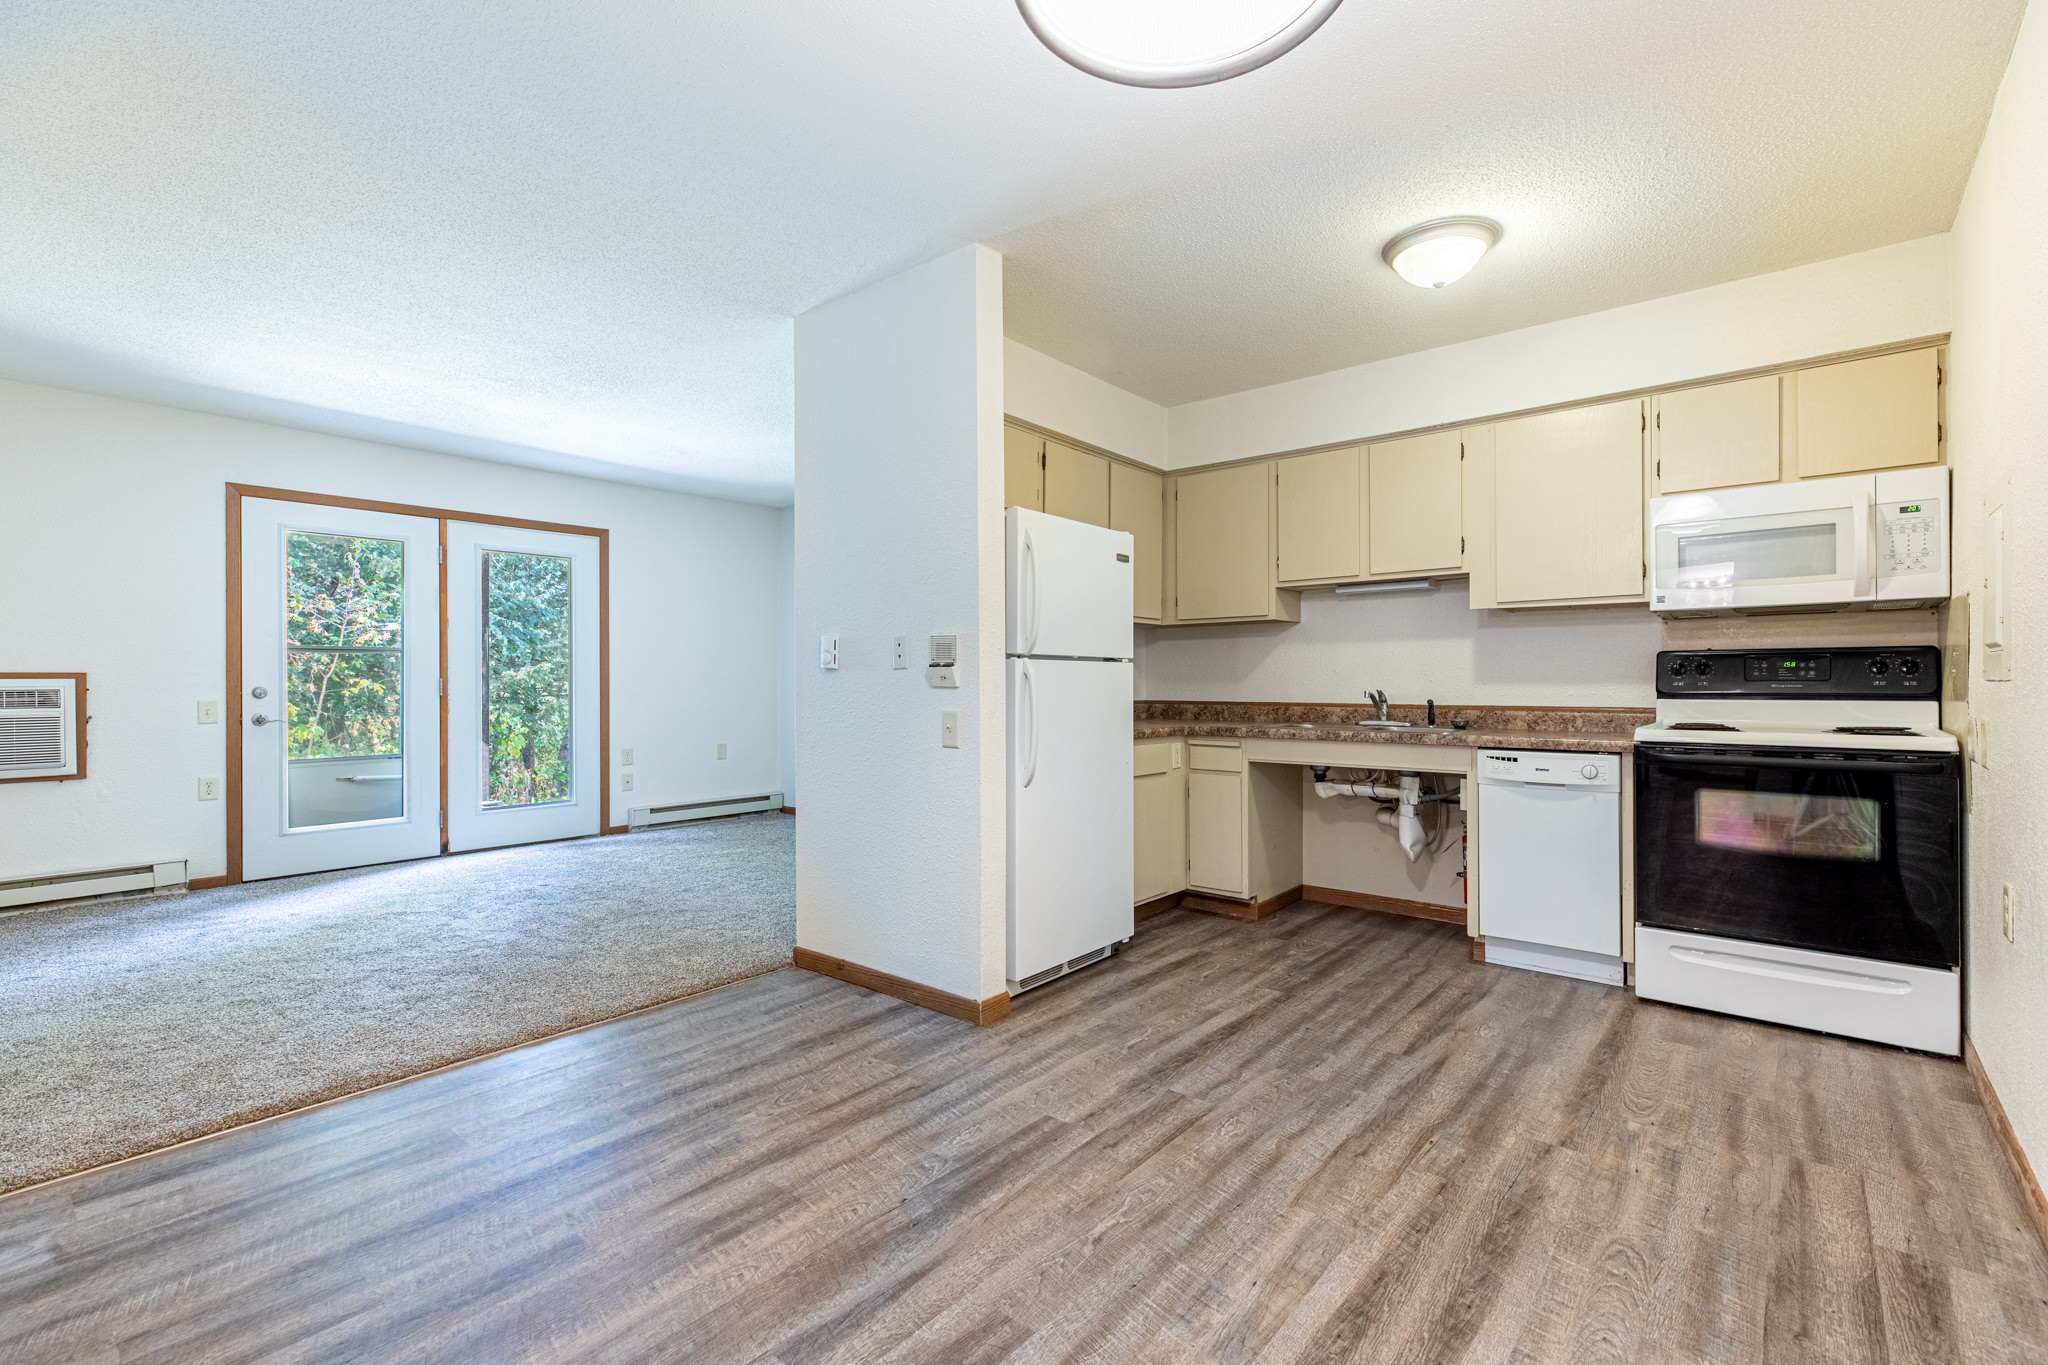 CLEARWATER RIVER APARTMENTS